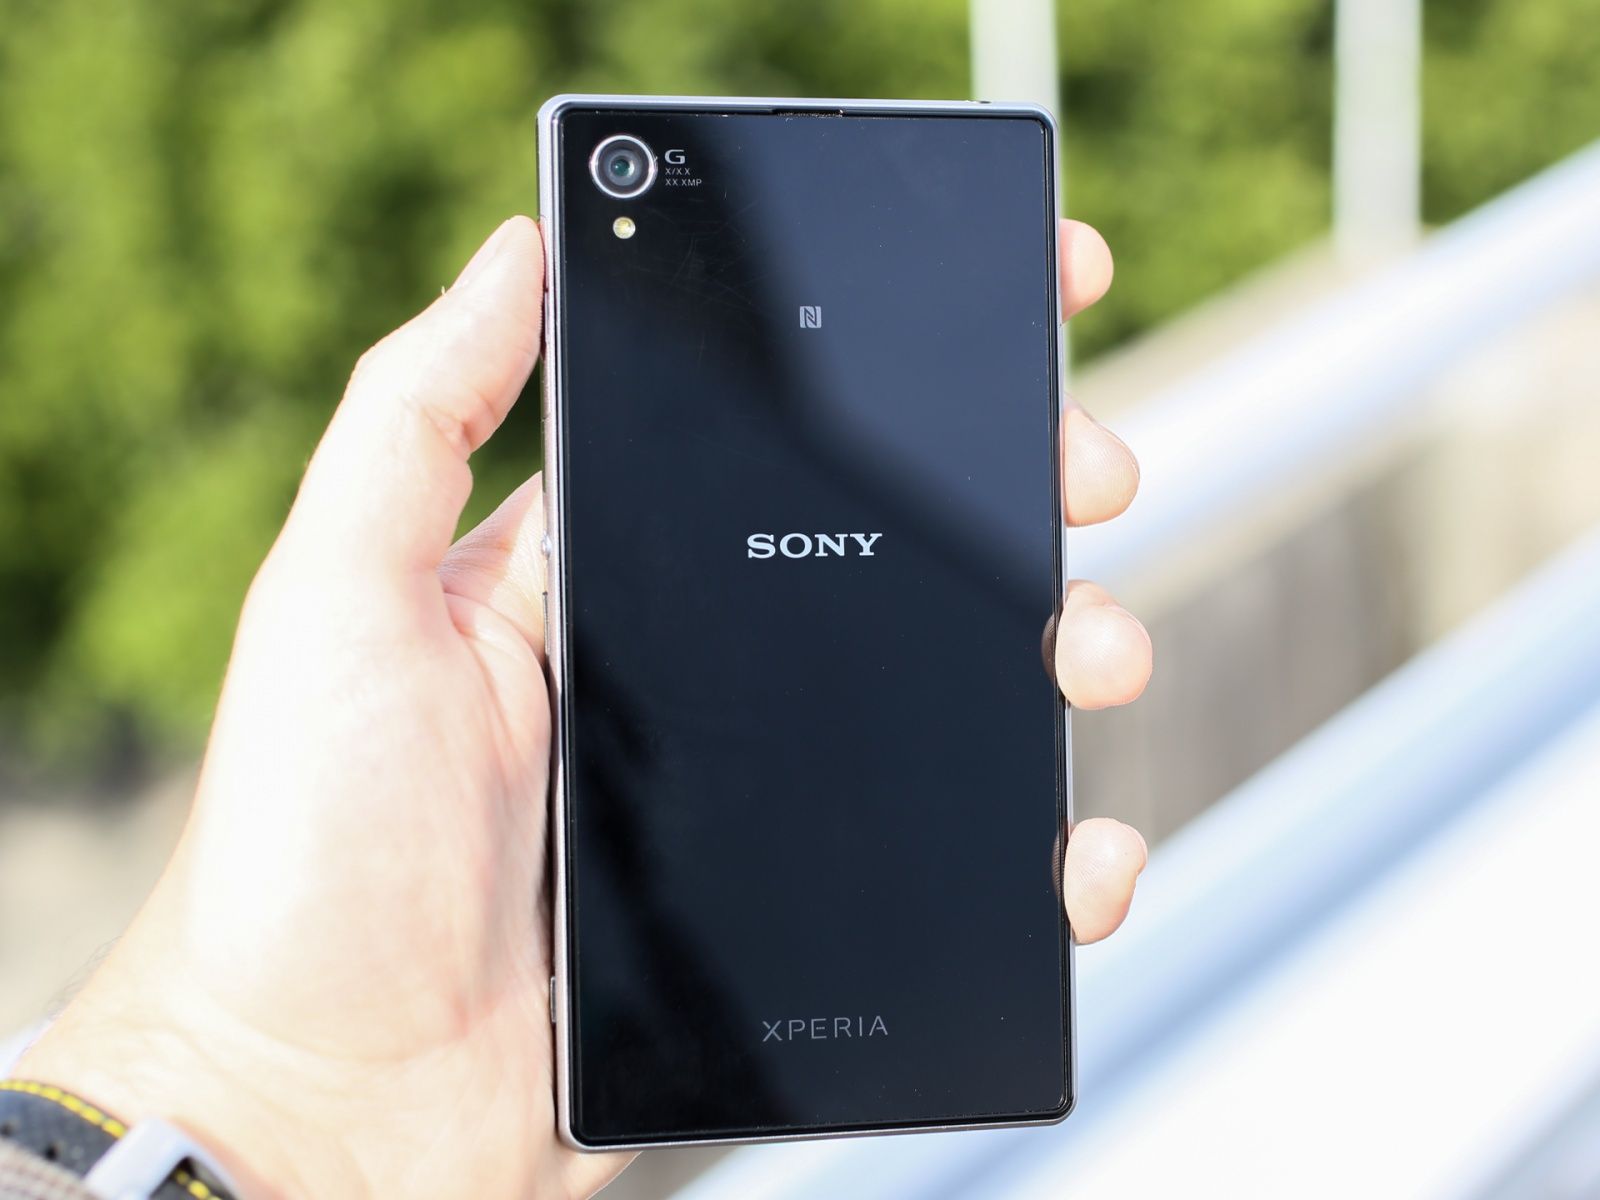 sony xperia z1 2 - Sony Xperia Z1 and Z Ultra Android 4.3 rollout begins, Smart Social Camera comes to the Z Ultra